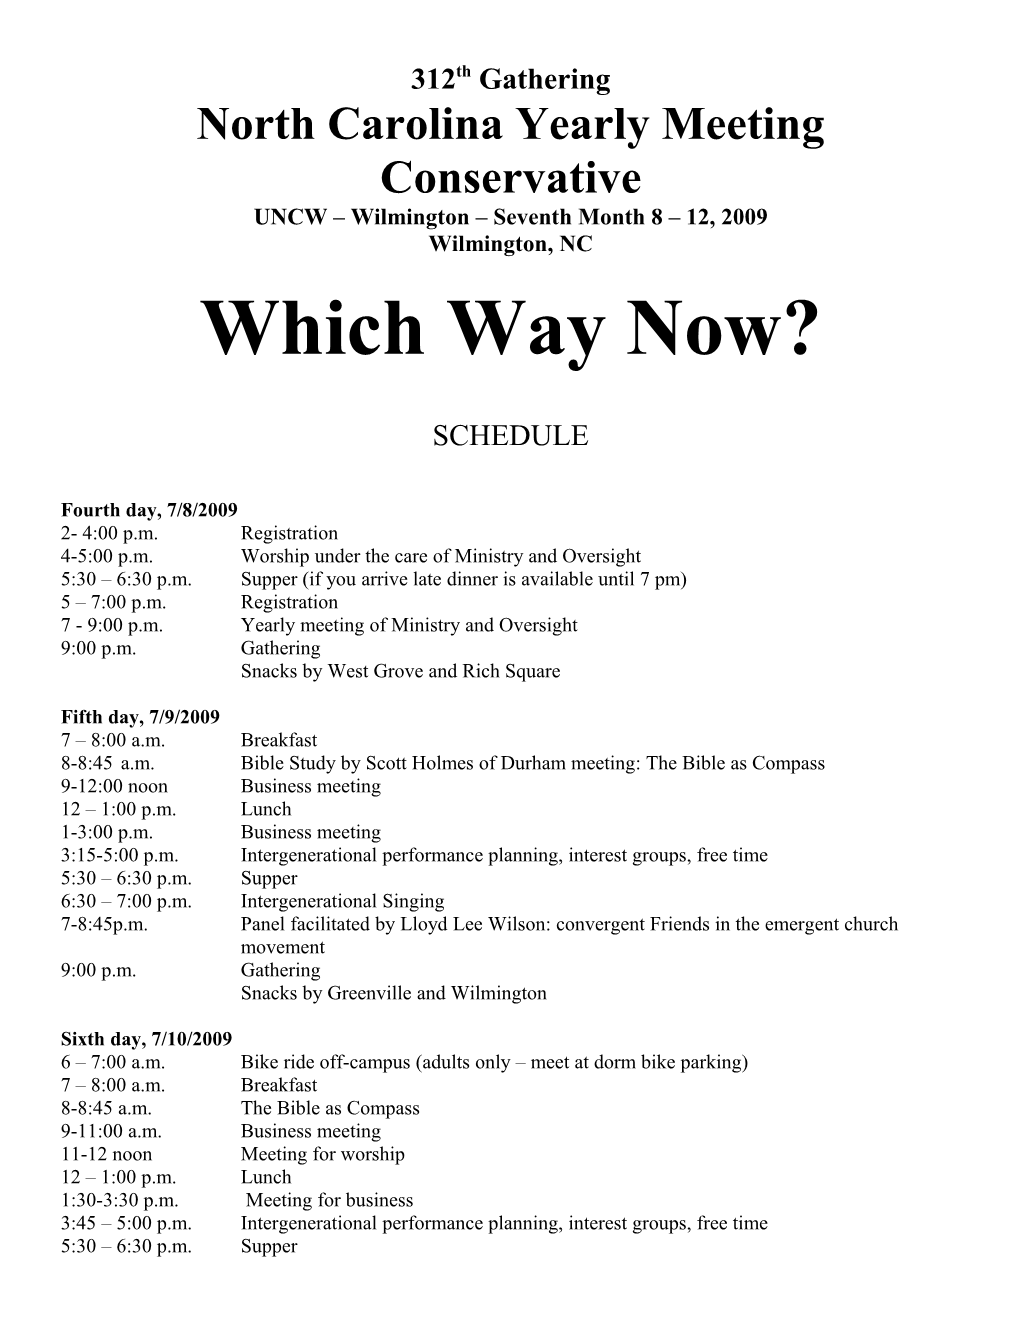 North Carolina Yearly Meeting (Conservative) Registration Form